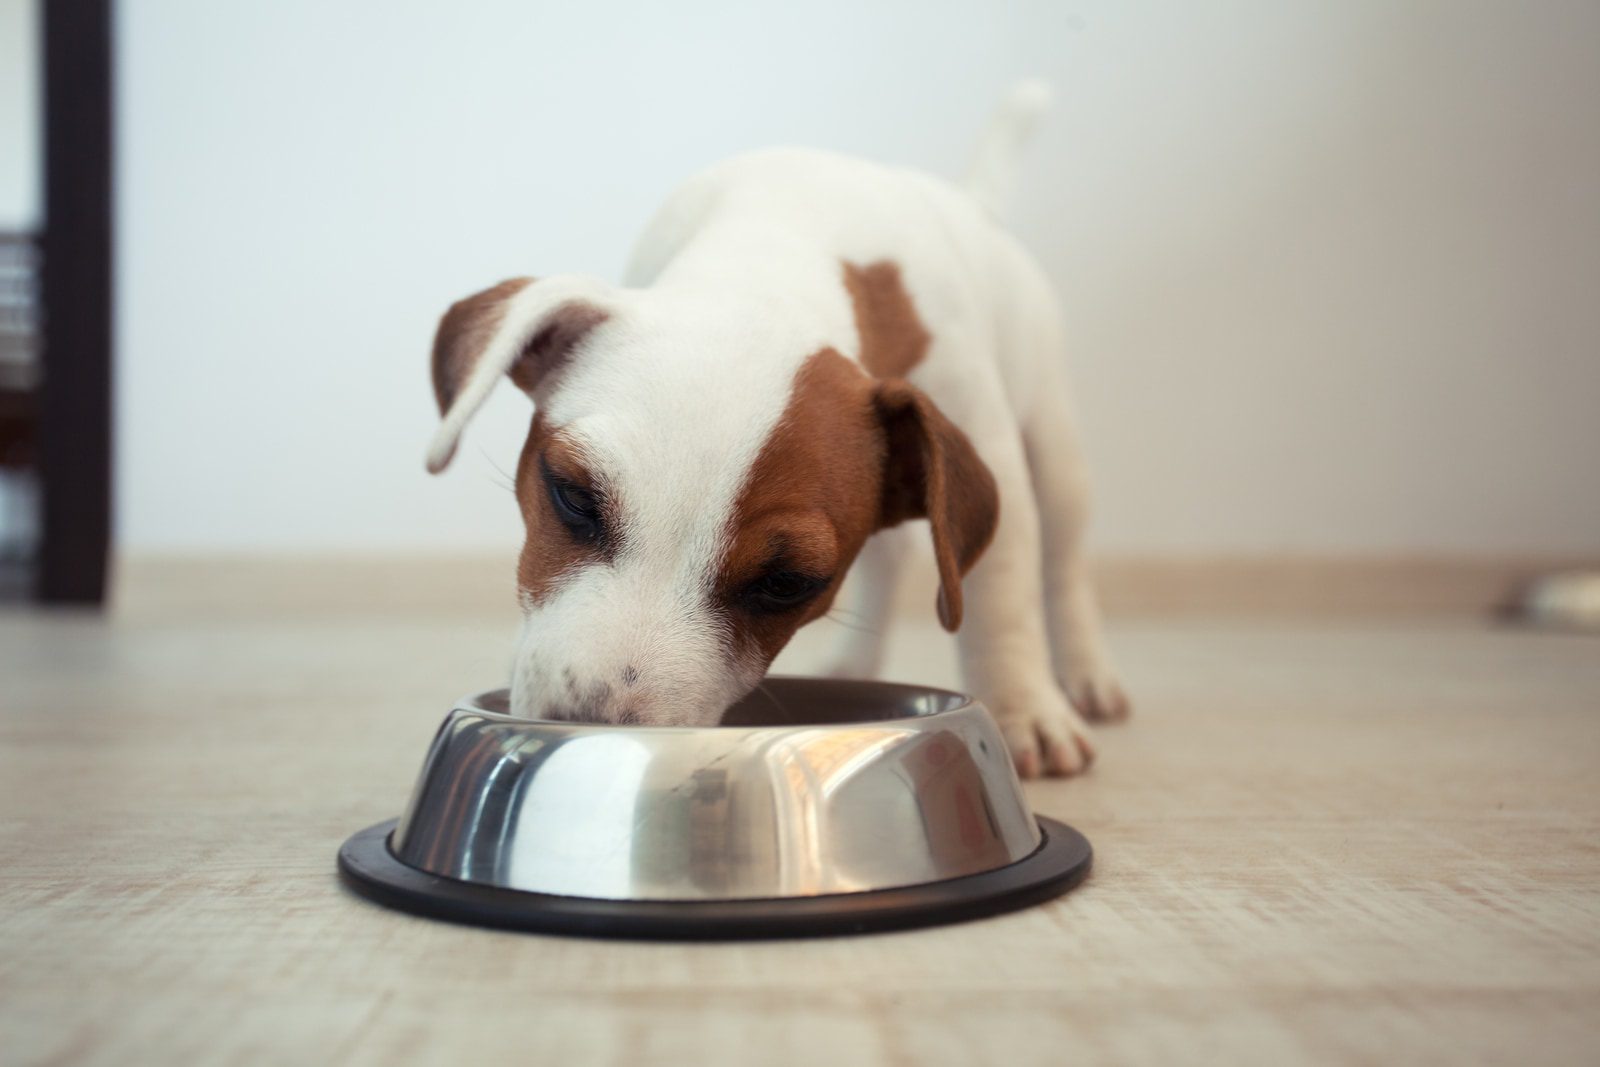 How many times a day should a dog be fed?